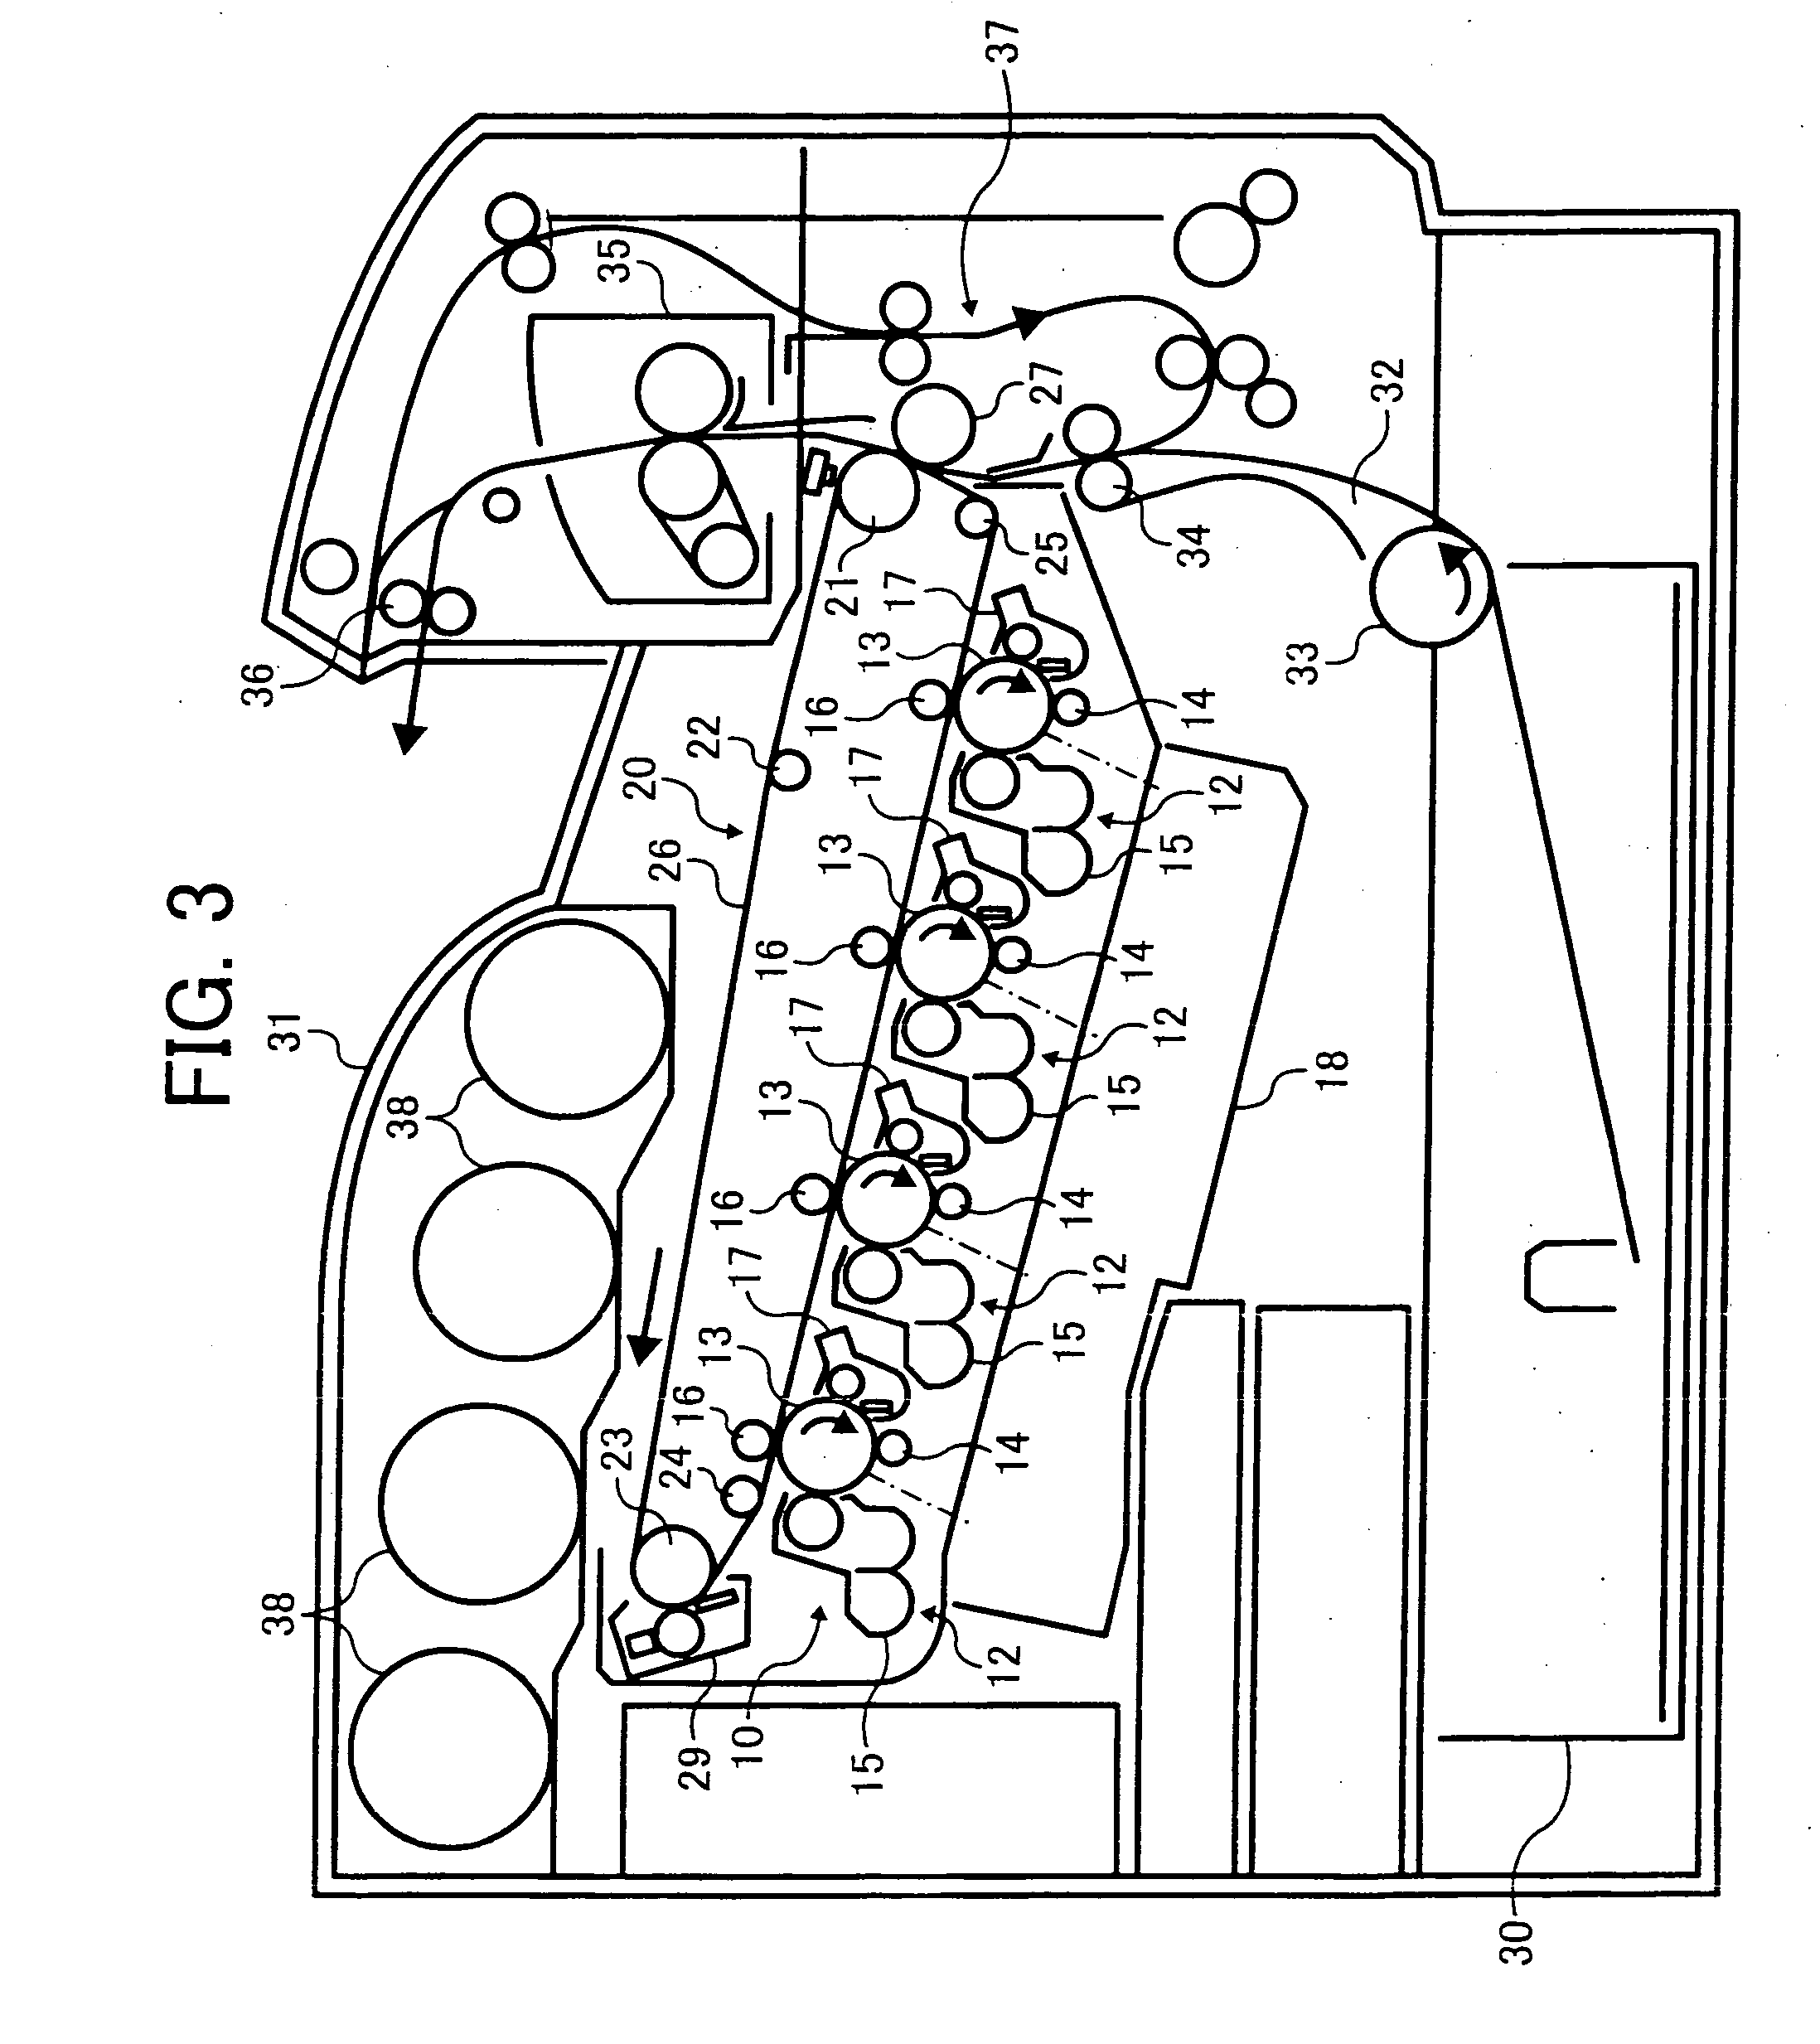 Image fixing apparatus, image forming apparatus, and image fixing method capable of effectively controlling an image fixing temperature